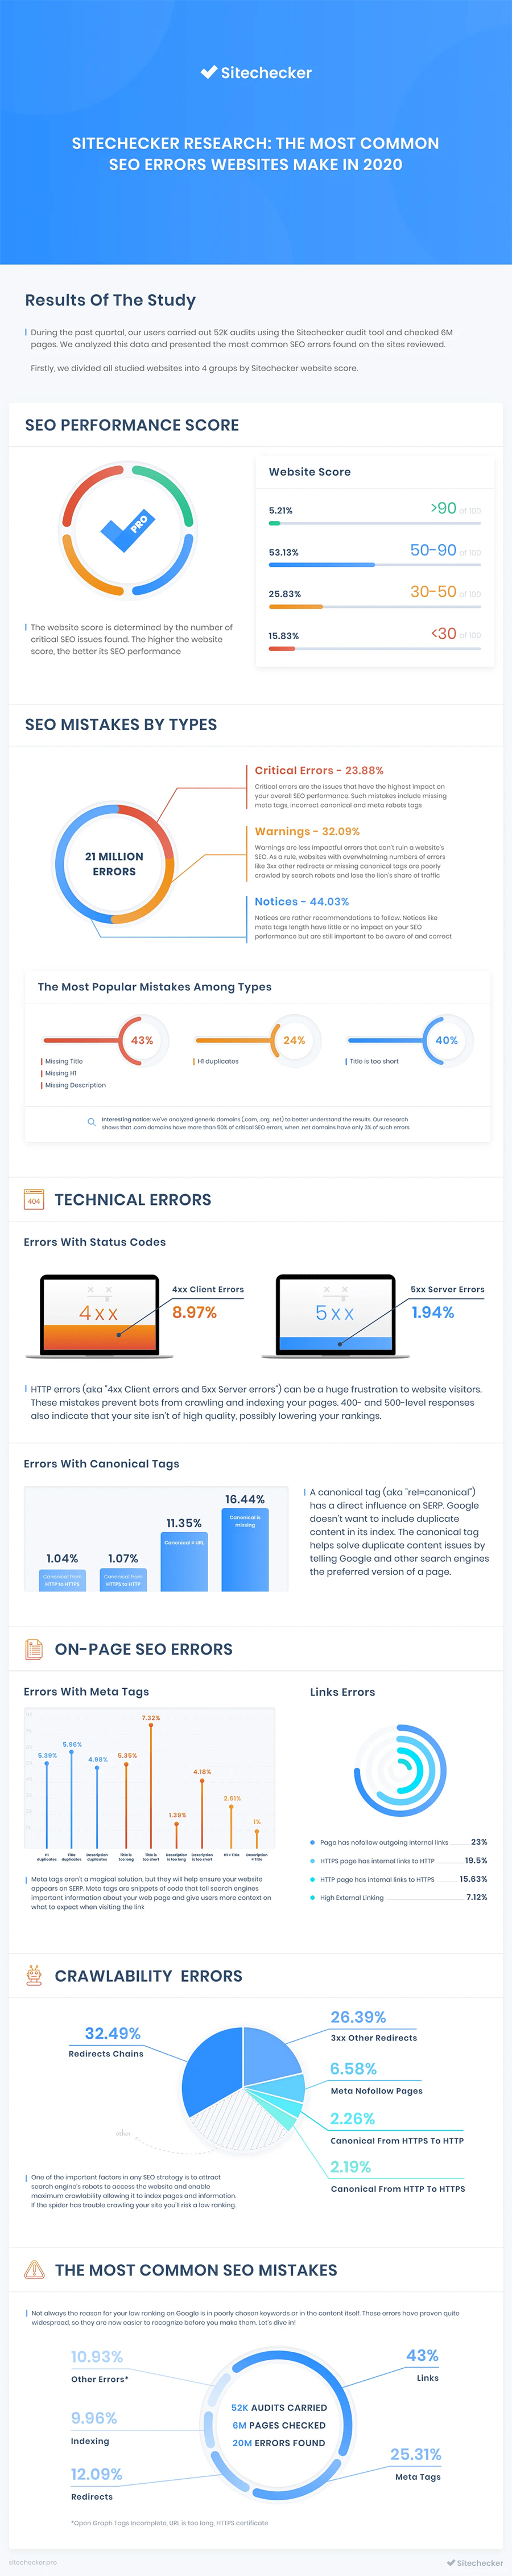 Infographic about common SEO mistakes